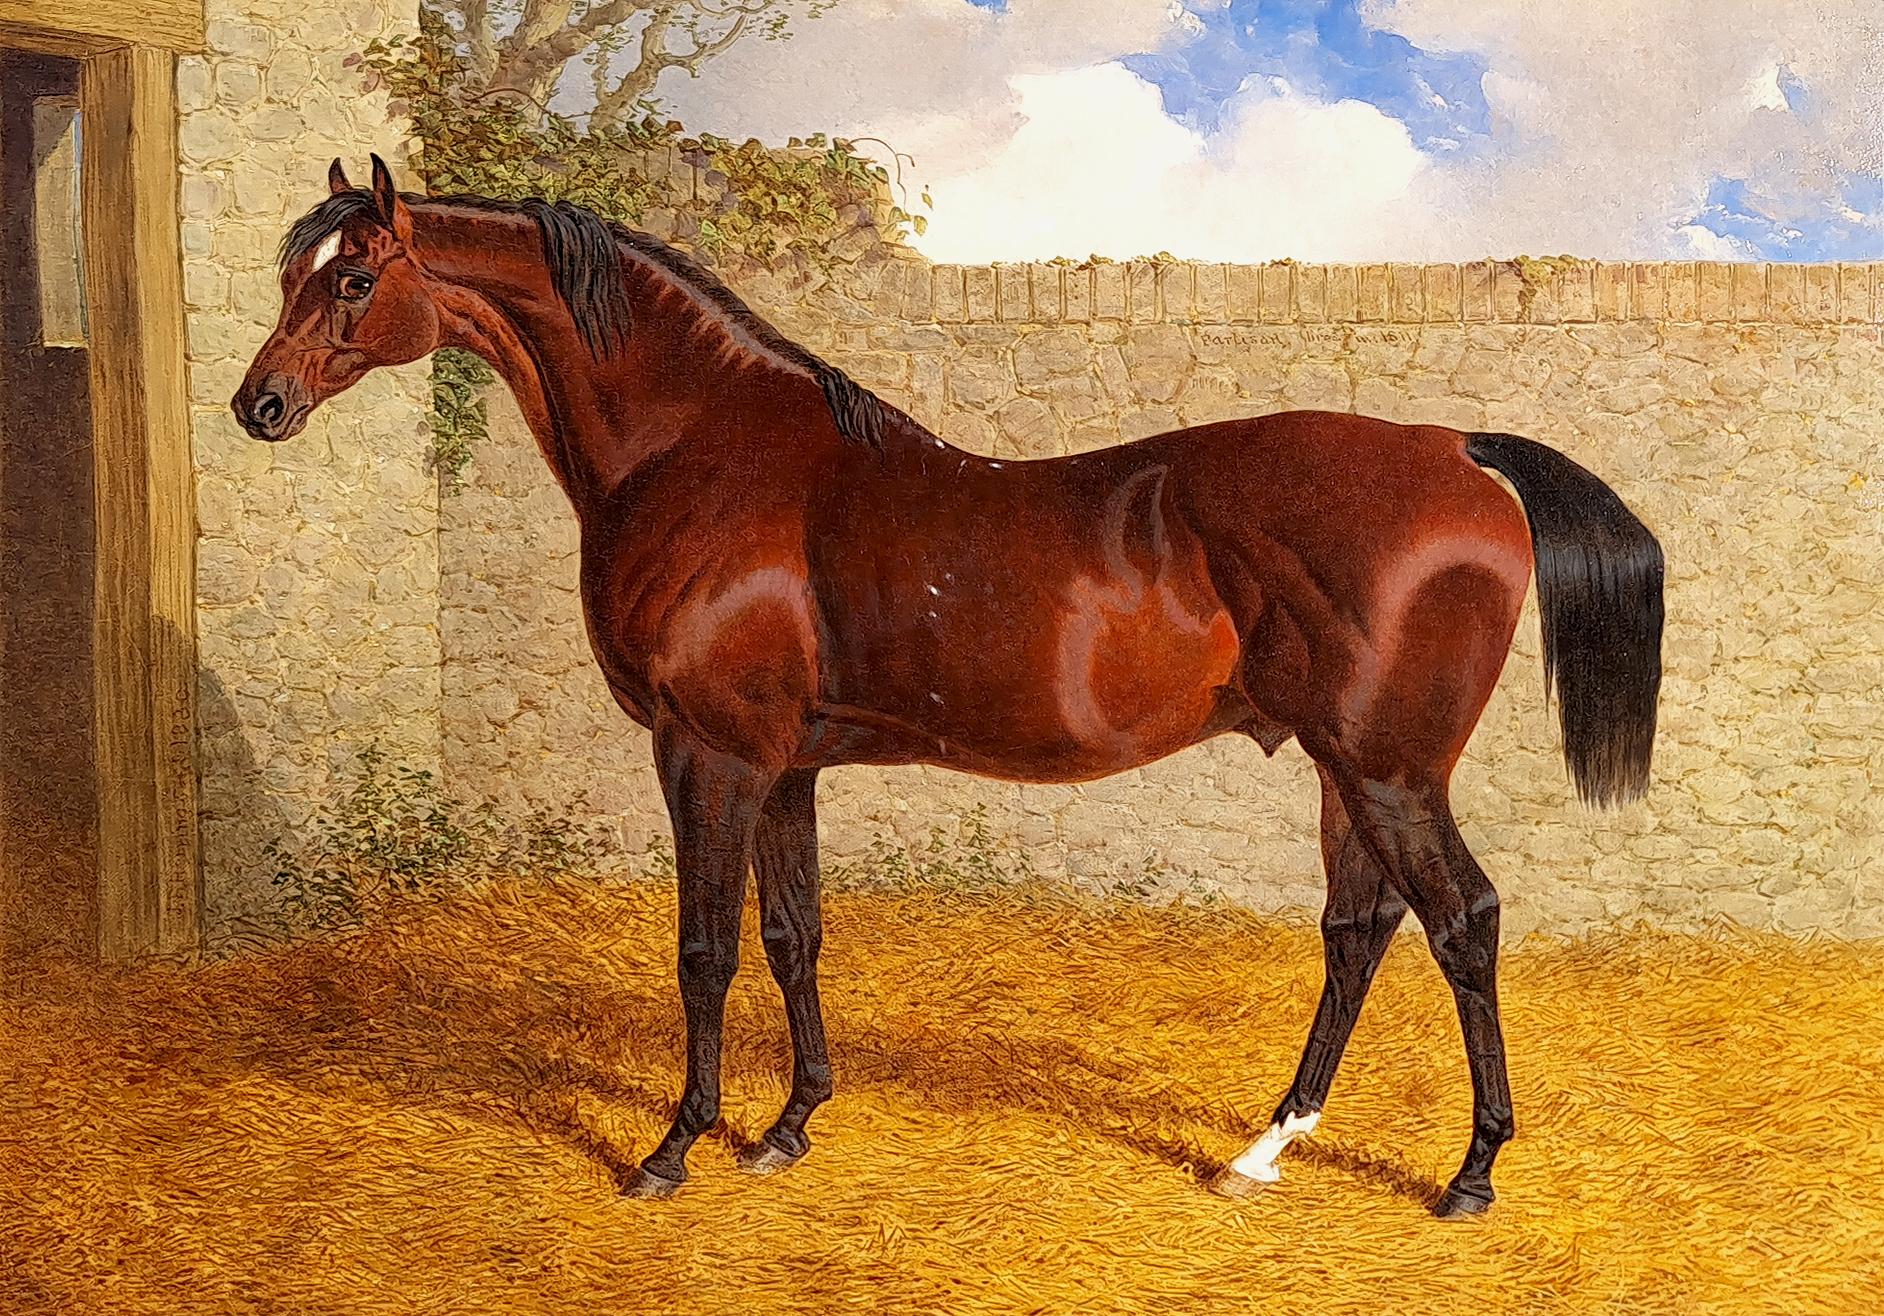 'Partisan' in a Stable Yard - Painting by John Frederick Herring Sr.